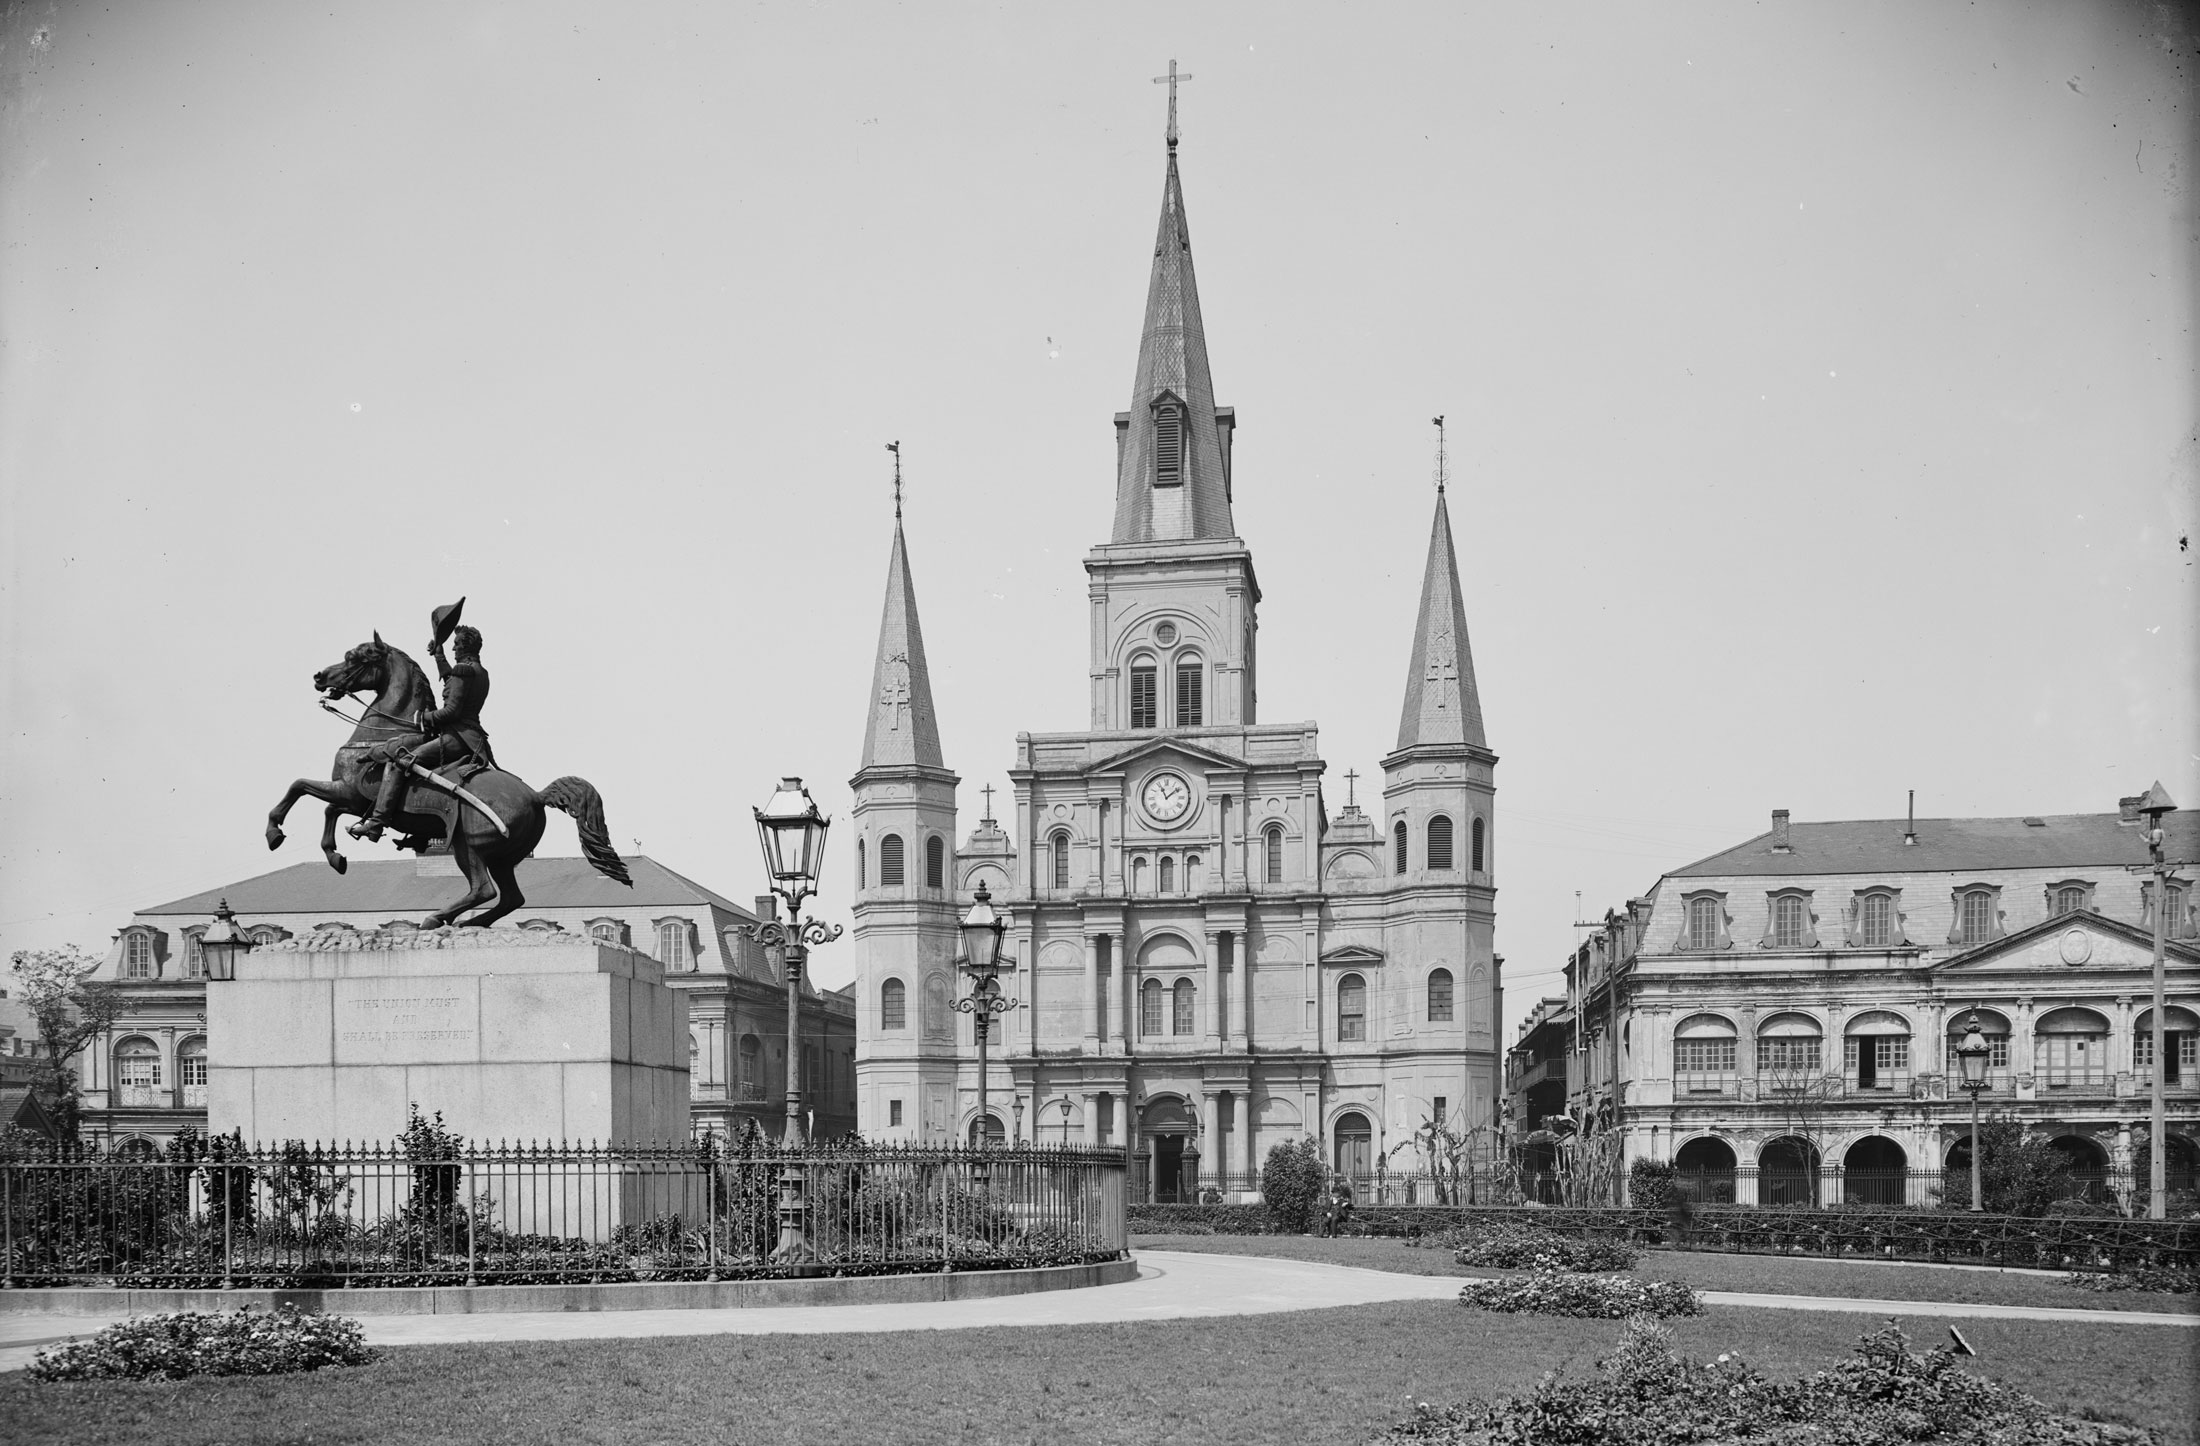 Detroit Publishing Co., Publisher. St. Louis Cathedral and Jackson Monument, New Orleans, Louisiana. United States New Orleans Louisiana, None. [Between 1900 and 1910] Photograph. https://www.loc.gov/item/2016807537/